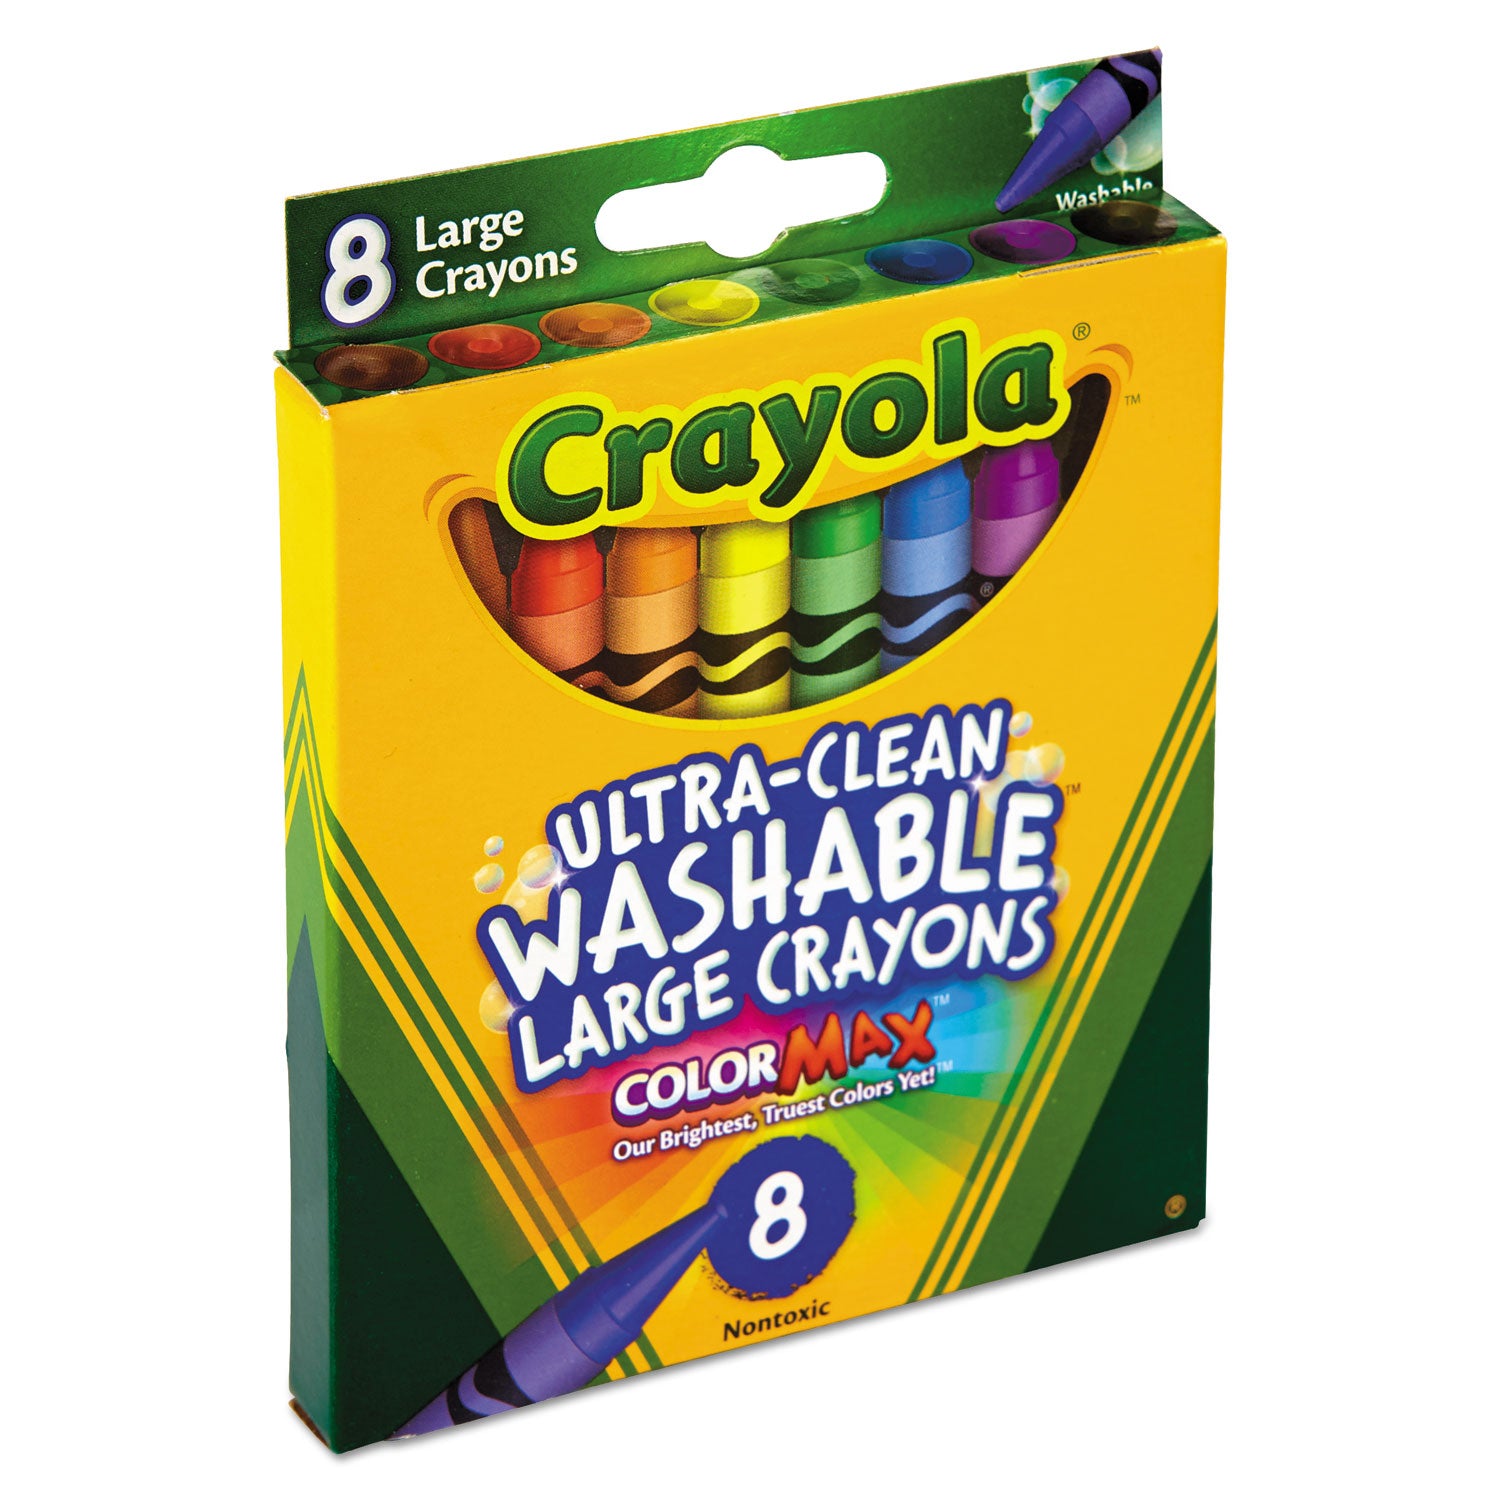 Ultra-Clean Washable Crayons, Large, 8 Colors/Box - 